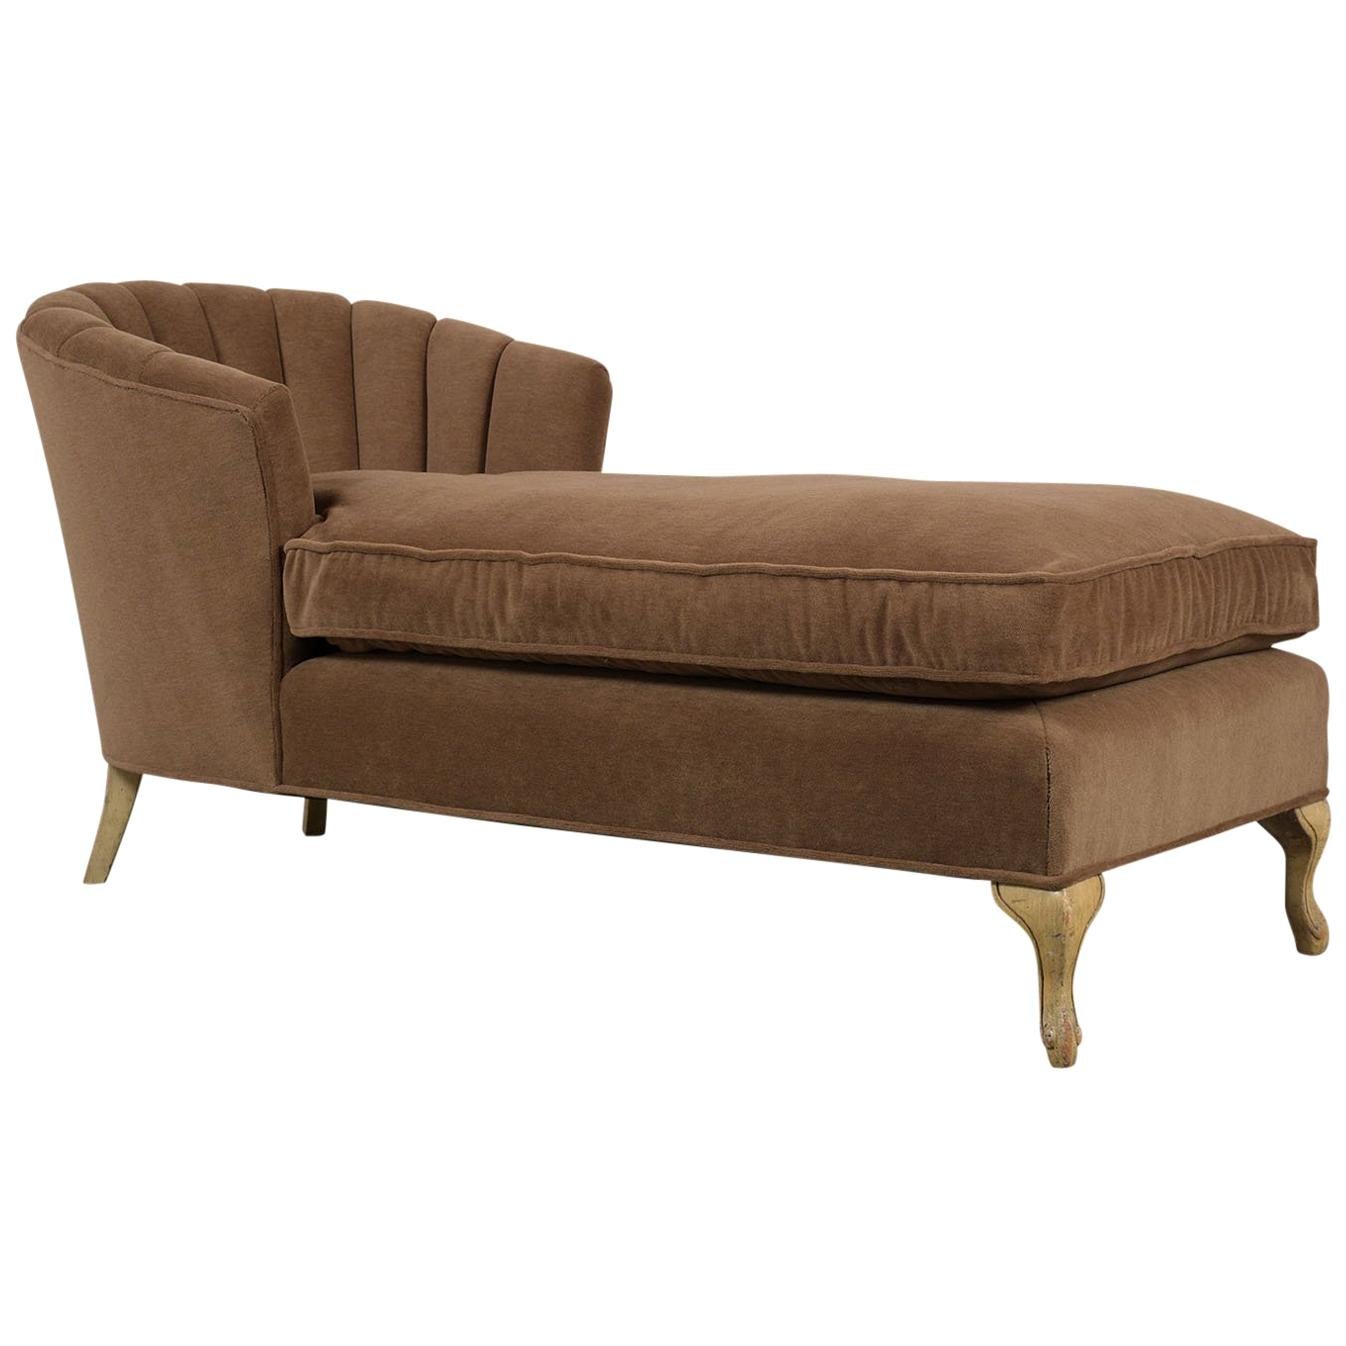 Hollywood Regency Style Chaise Lounge